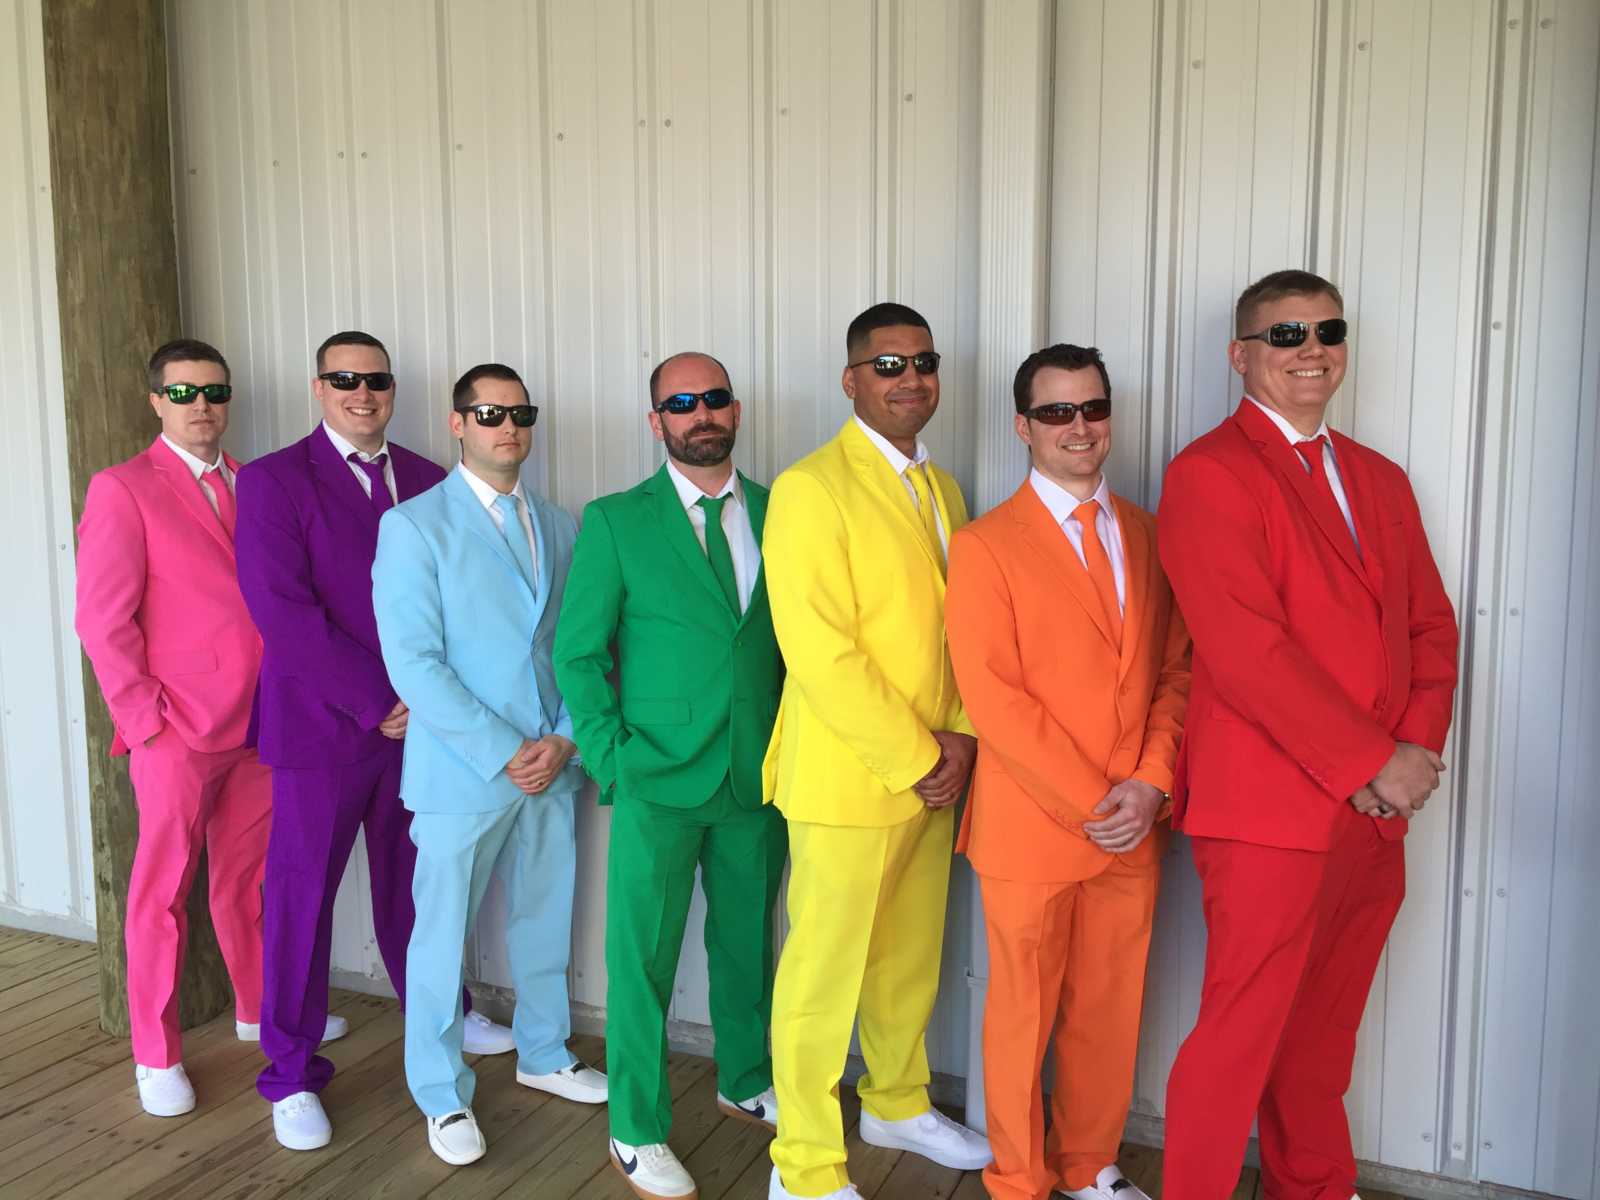 Men standing in line colorful suits in order of rainbow with sunglasses on